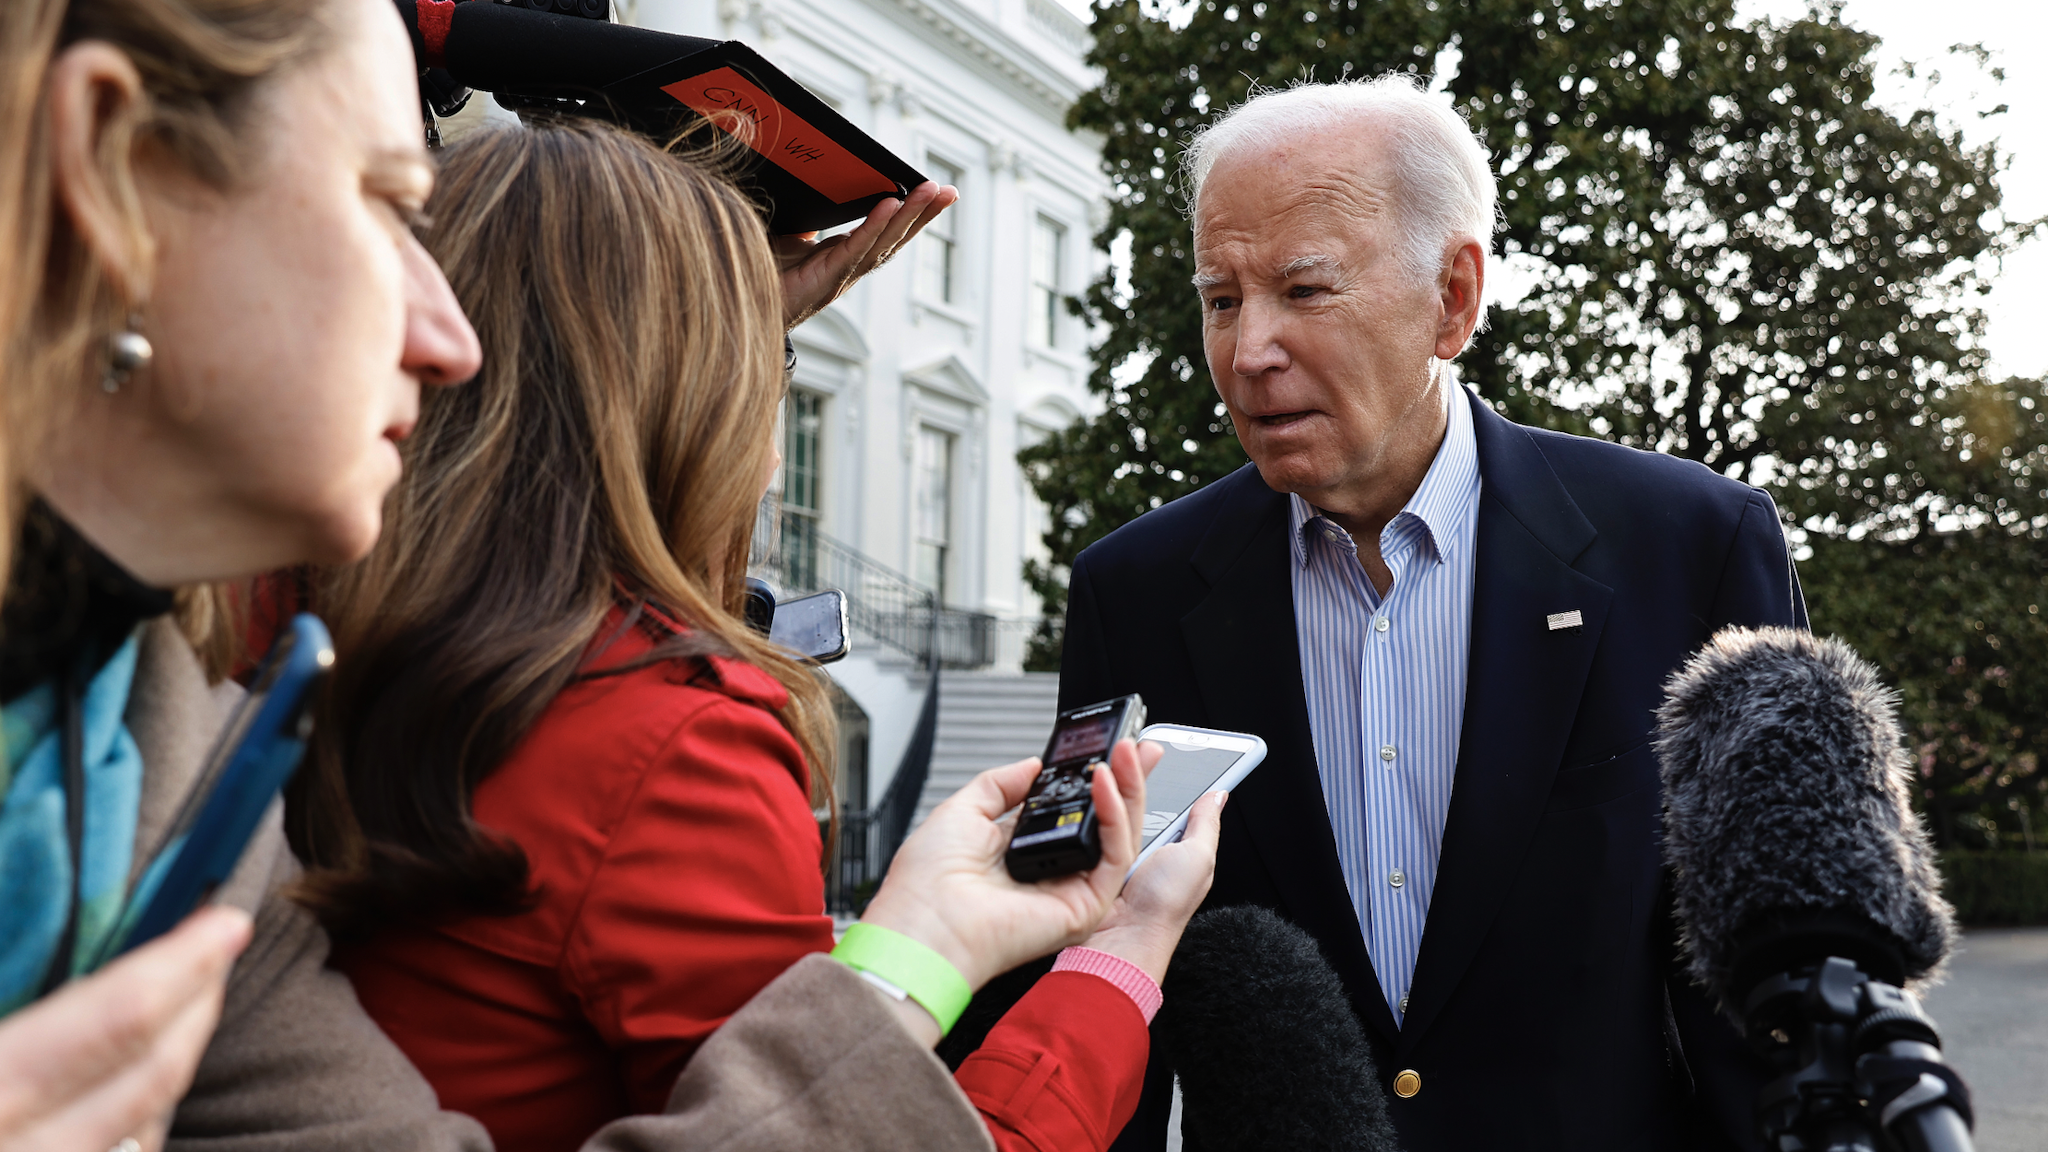 WASHINGTON, DC - MARCH 31: U.S. President Joe Biden declines to comment after reporters question him about the criminal indictment of former President Donald Trump as Biden departs the White House on March 31, 2023 in Washington, DC. Biden and first lady Jill Biden are traveling to Rolling Fork, Mississippi, to tour the community that was devastated by a tornado last week.